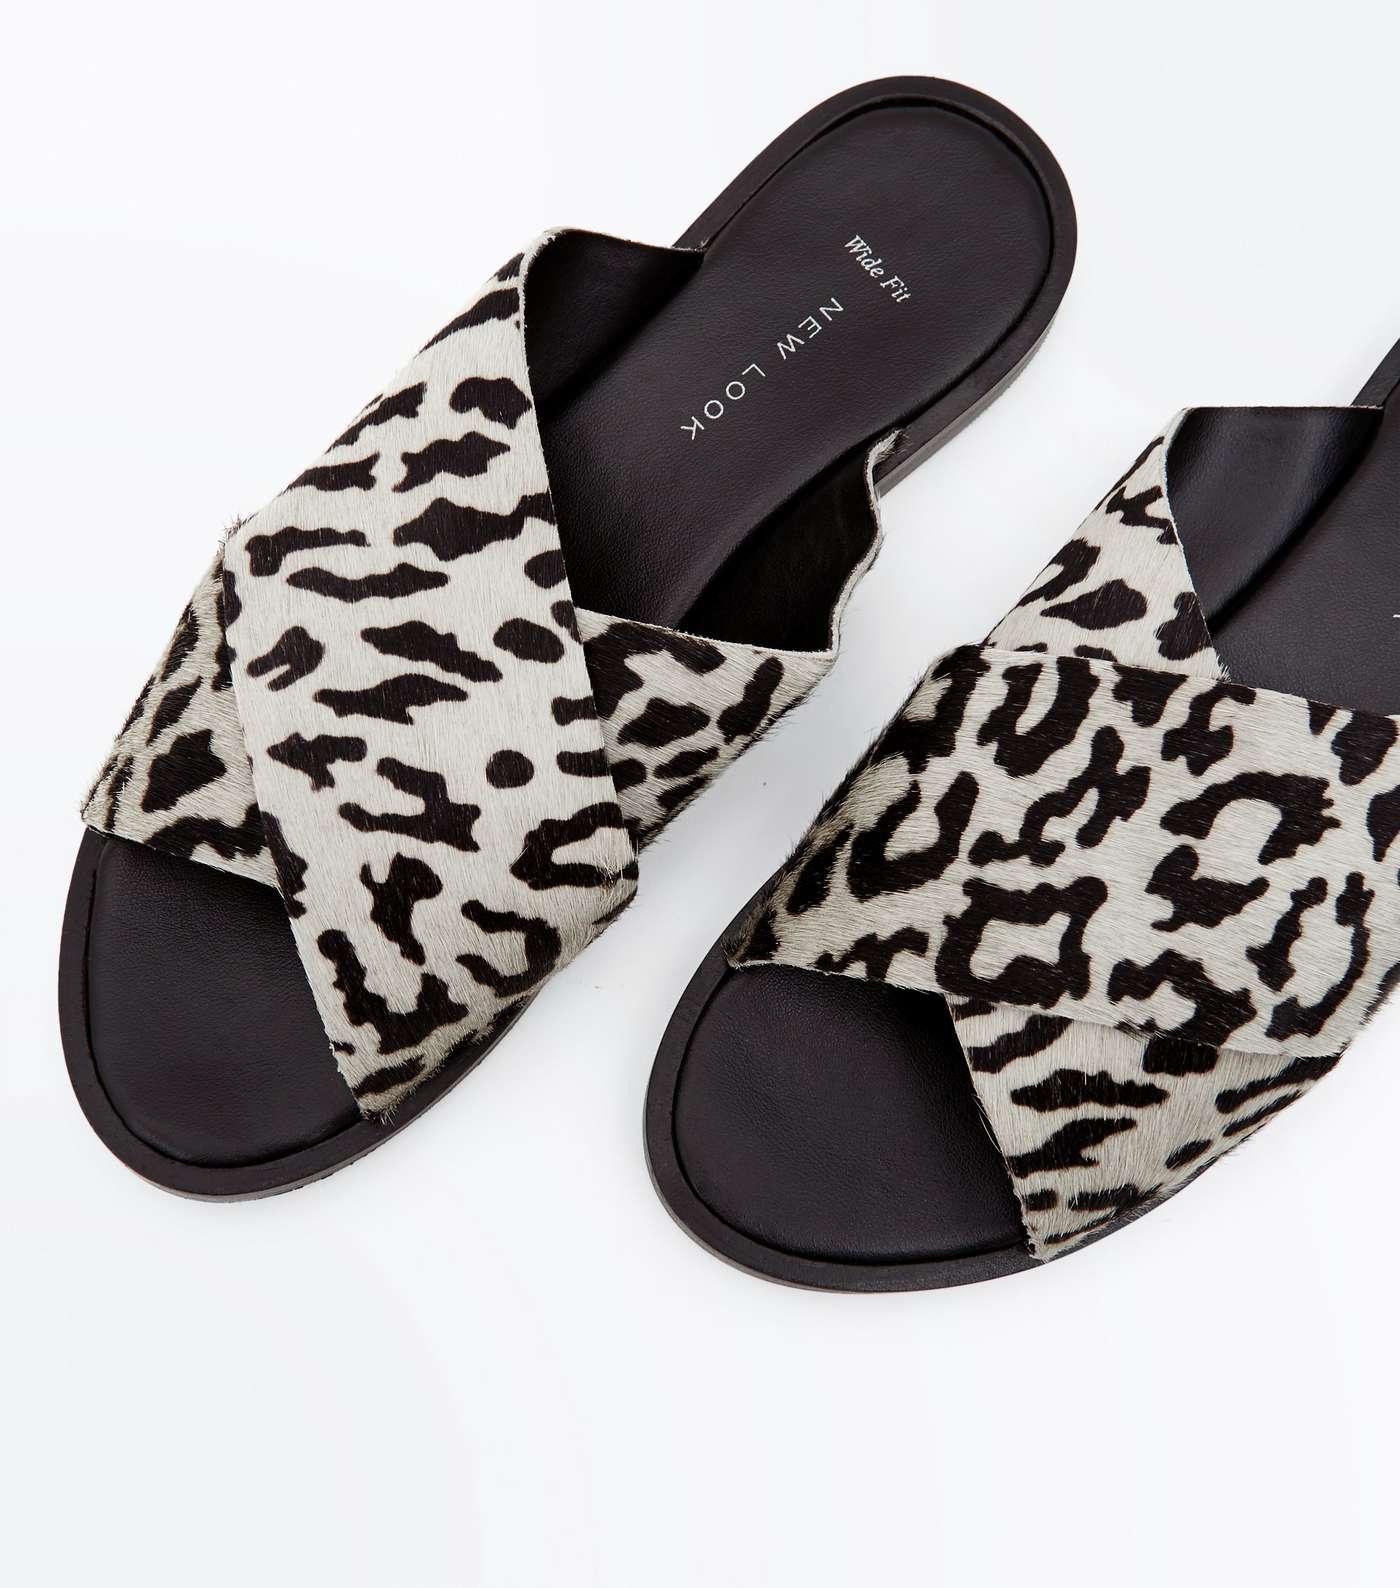 Wide Fit Cream Leather Leopard Print Sliders Image 4